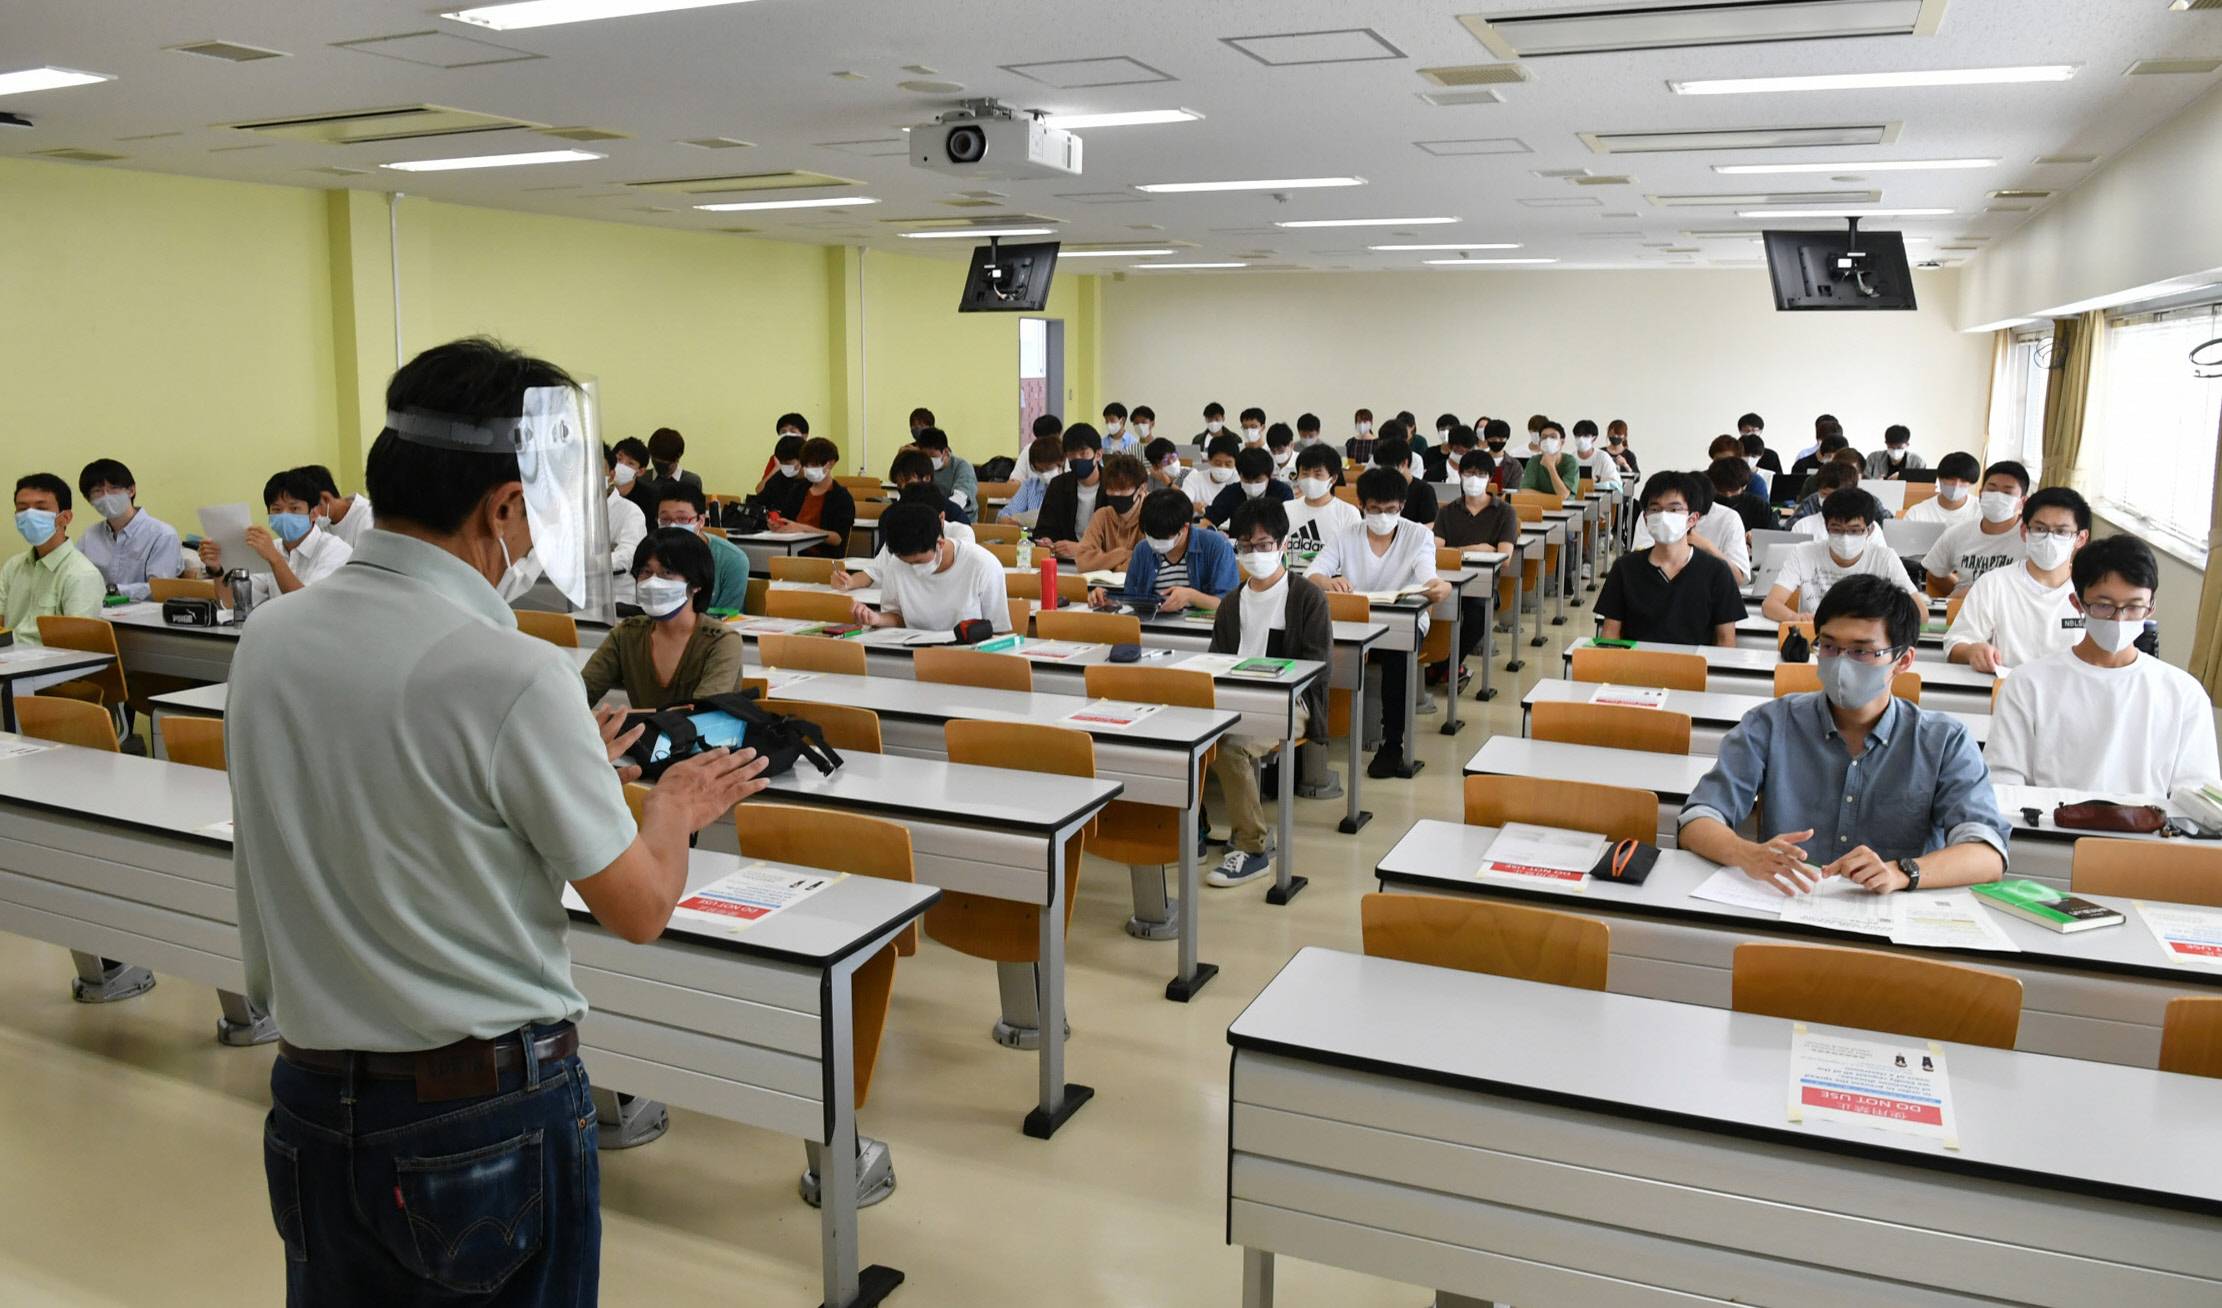 Universities in Chubu returning to face-to-face classes - The